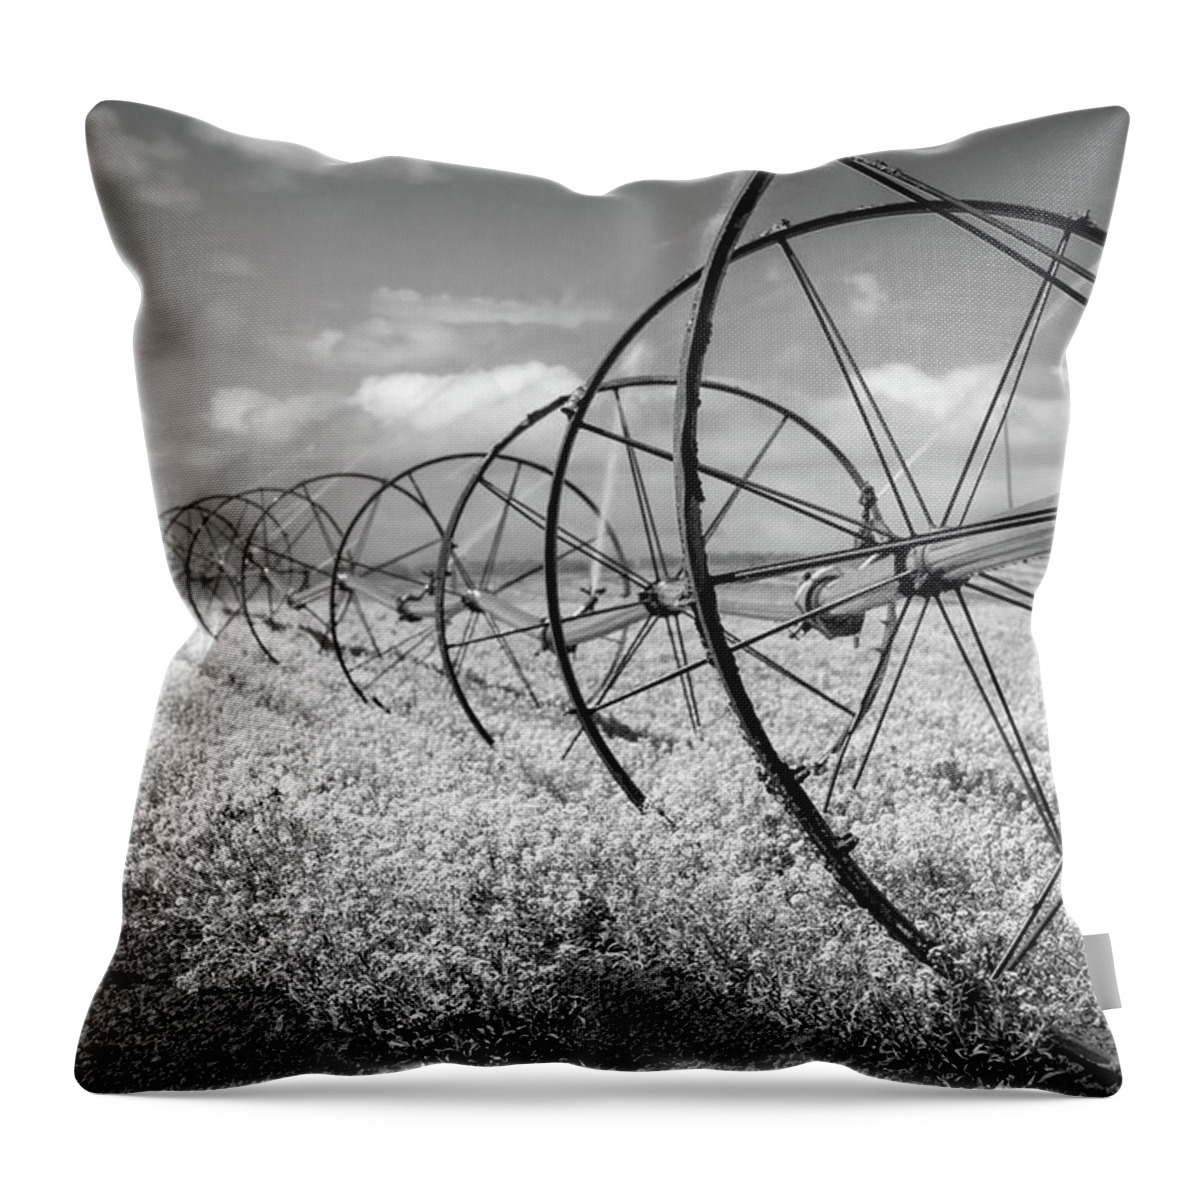 Wheel Throw Pillow featuring the photograph Wheel Irrigation Sprinkler and Rows of Flowers by Catherine Avilez